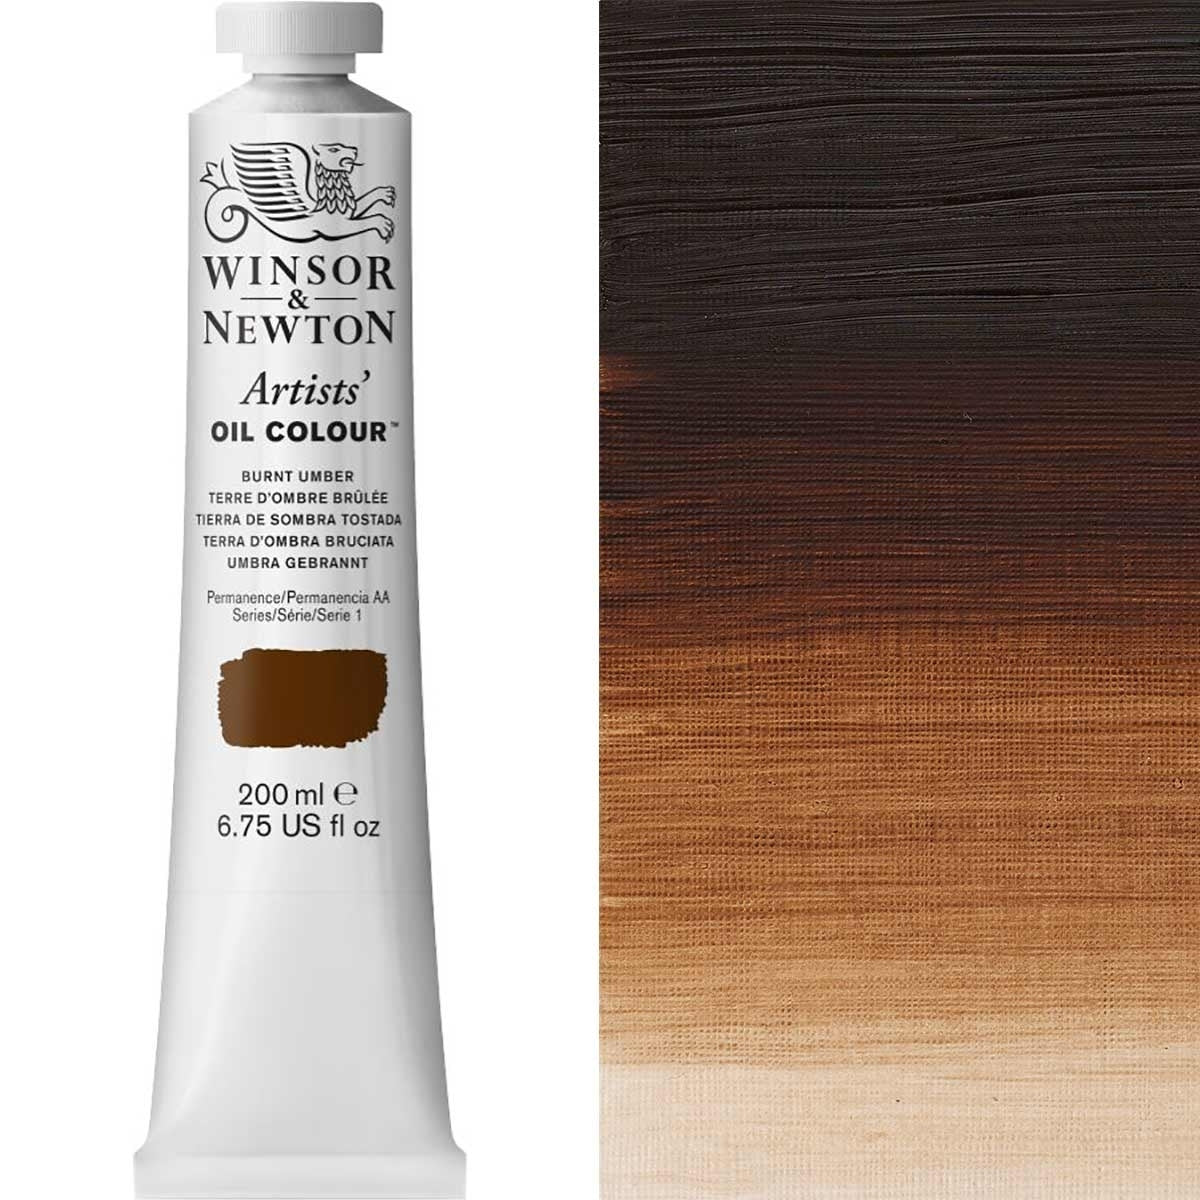 Winsor and Newton - Artists' Oil Colour - 200ml - Burnt Umber